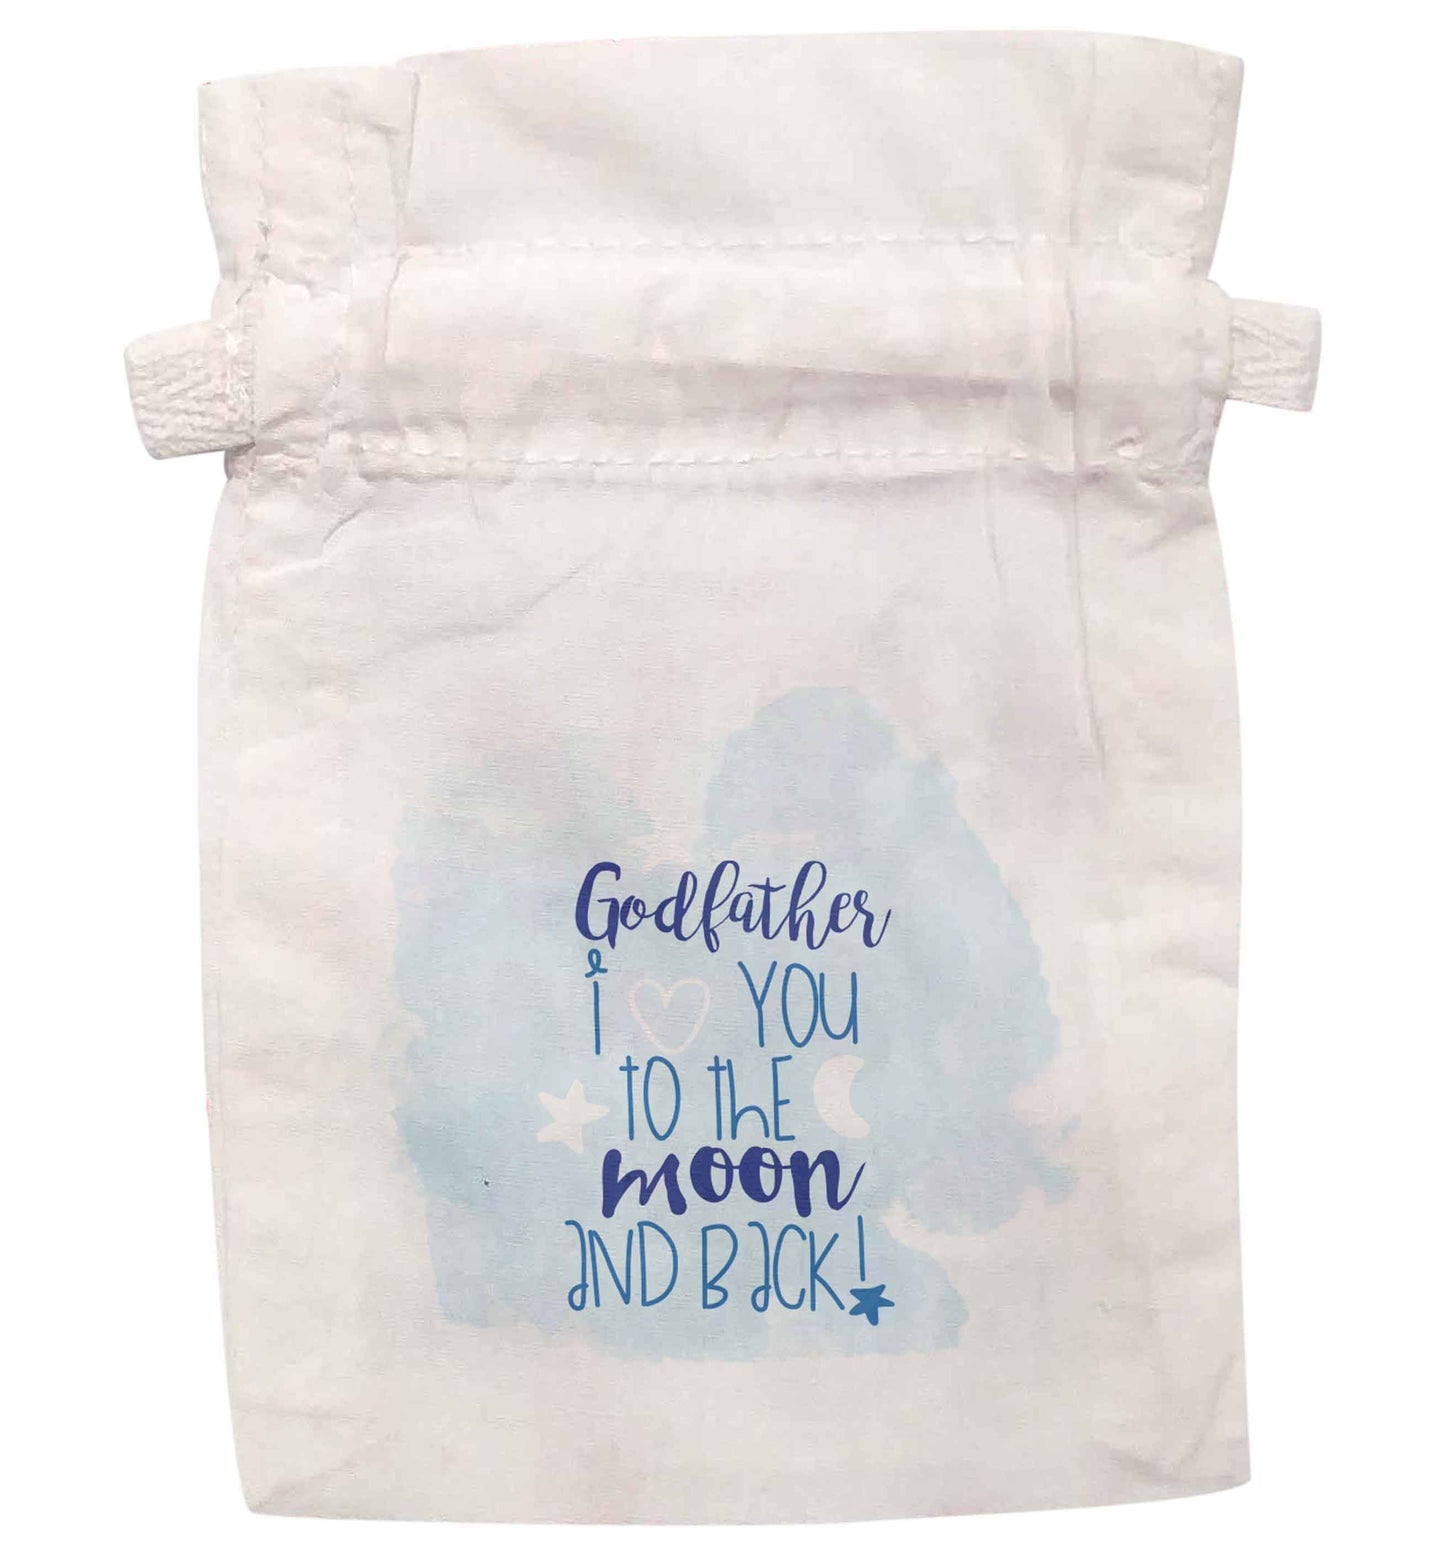 Godfather I love you to the moon and back | XS - L | Pouch / Drawstring bag / Sack | Organic Cotton | Bulk discounts available!